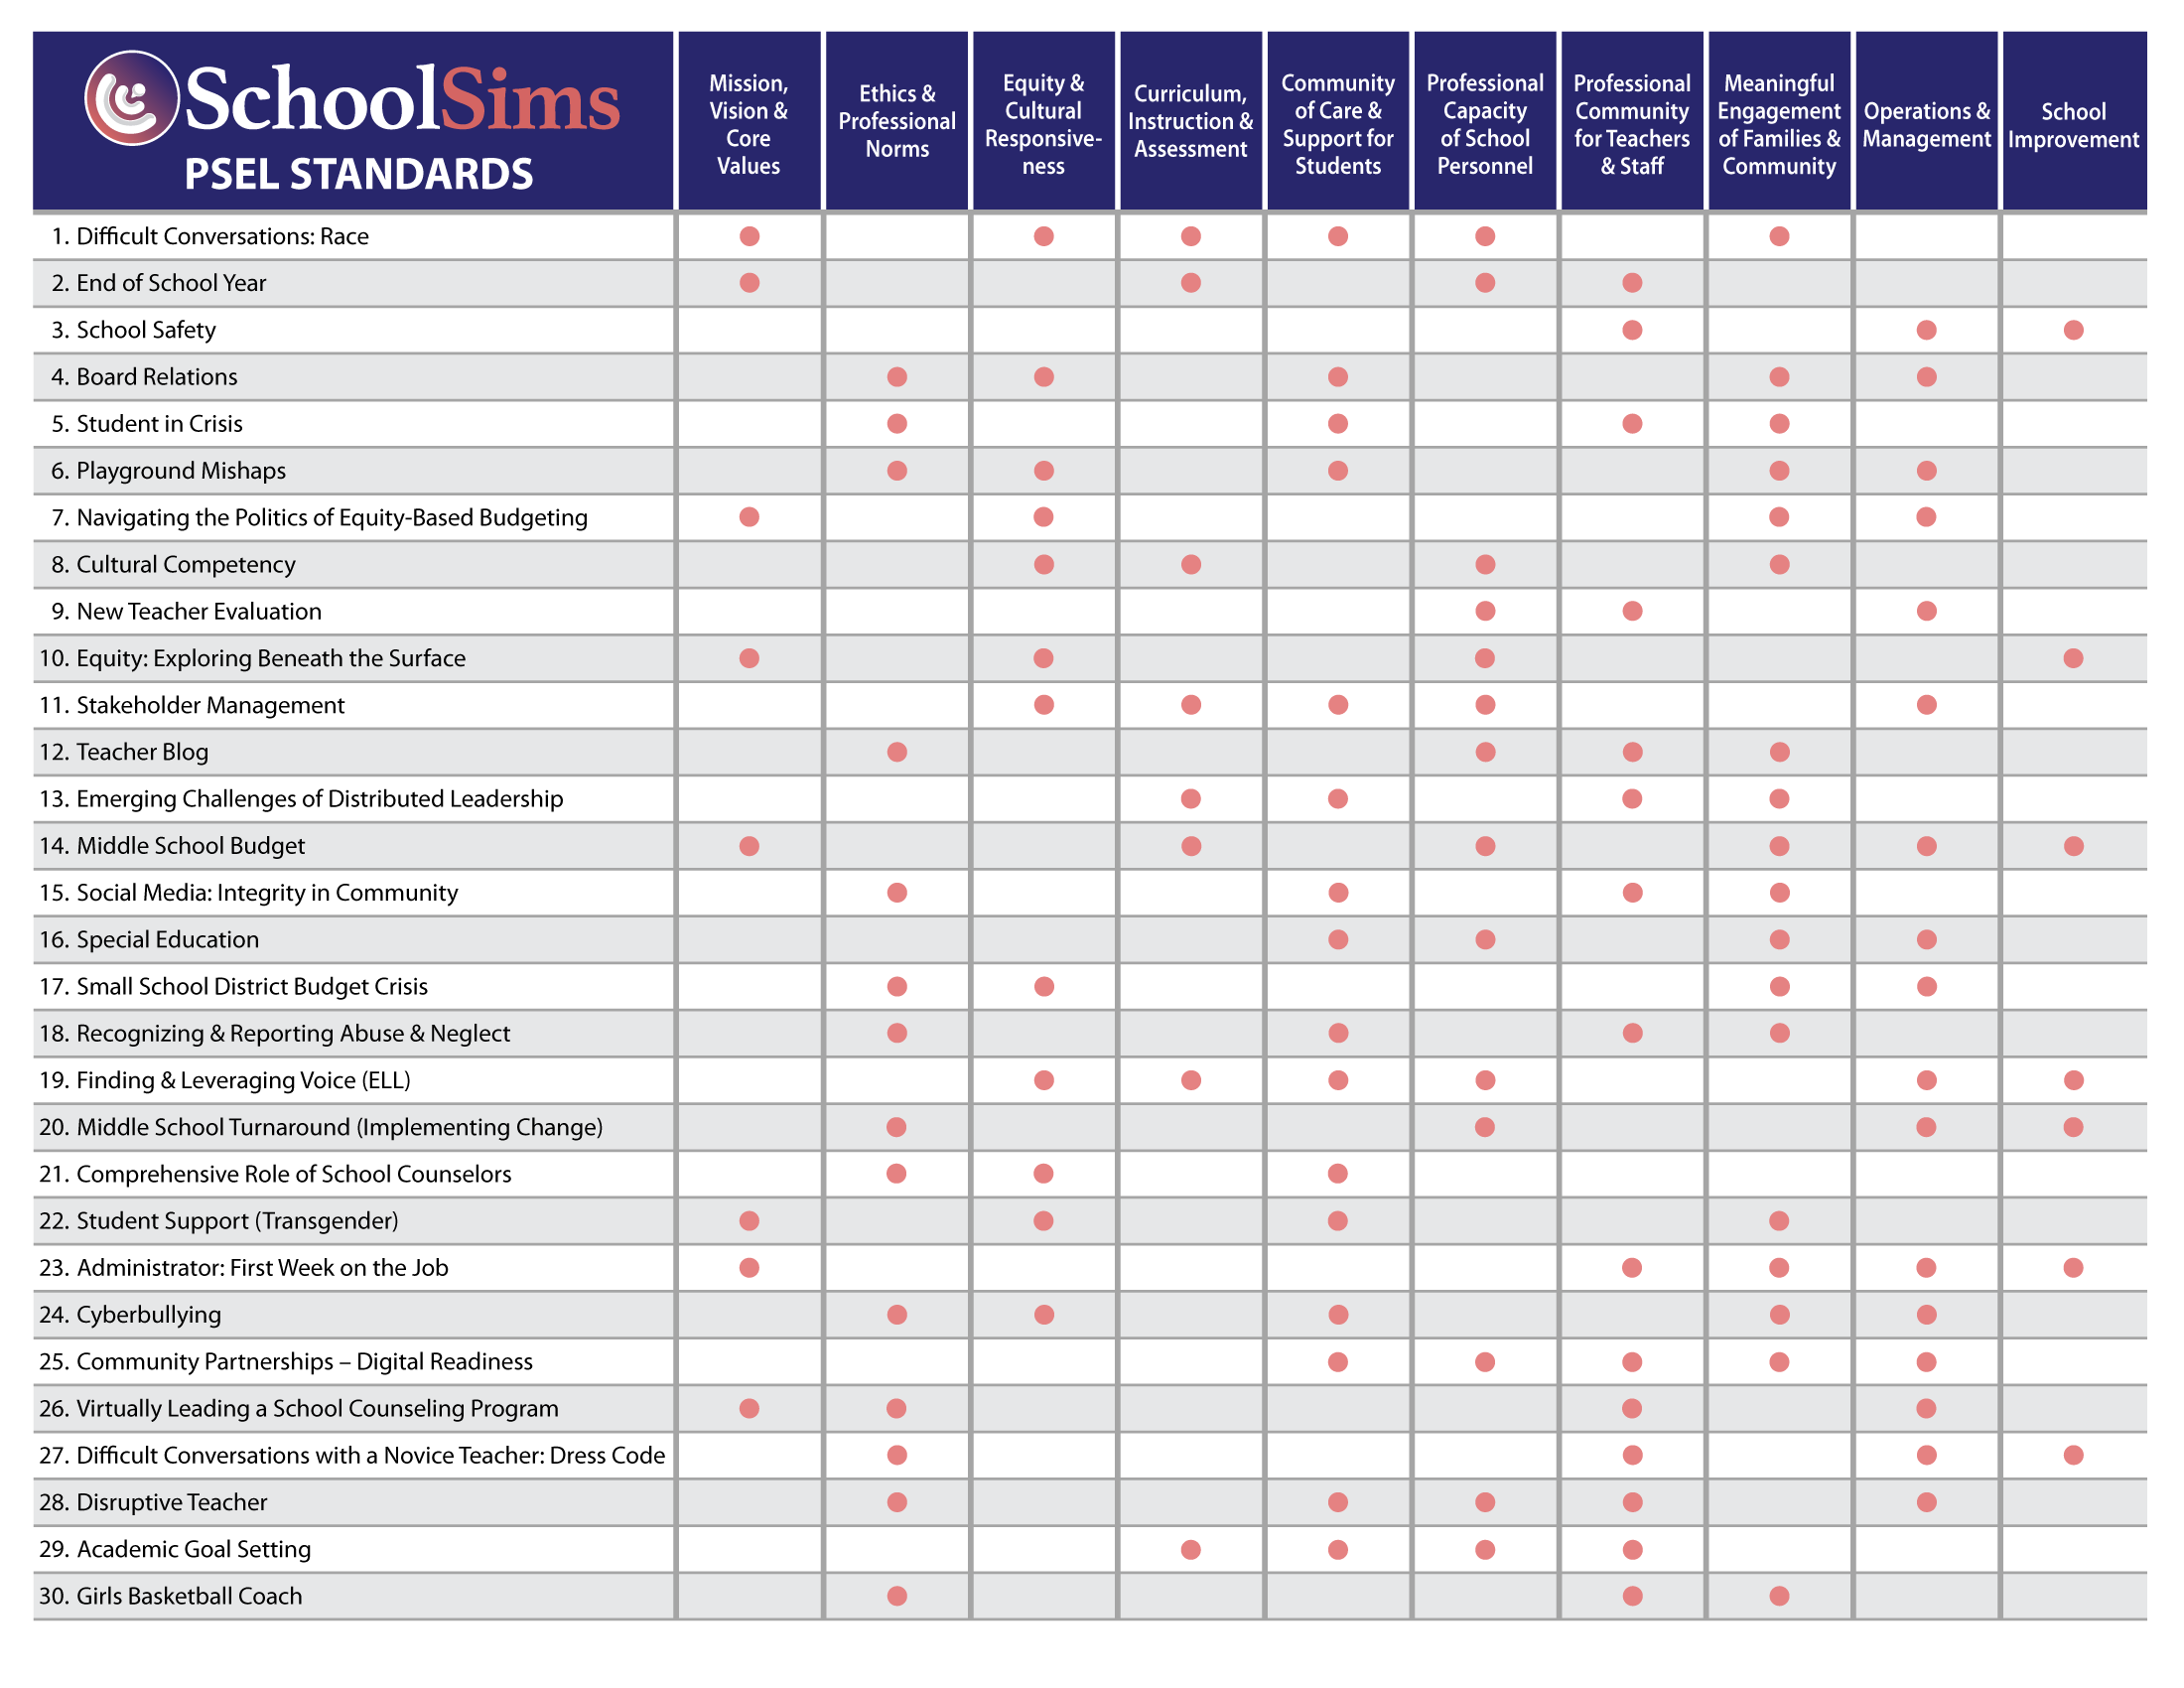 SchoolSims Align with PSEL Standards